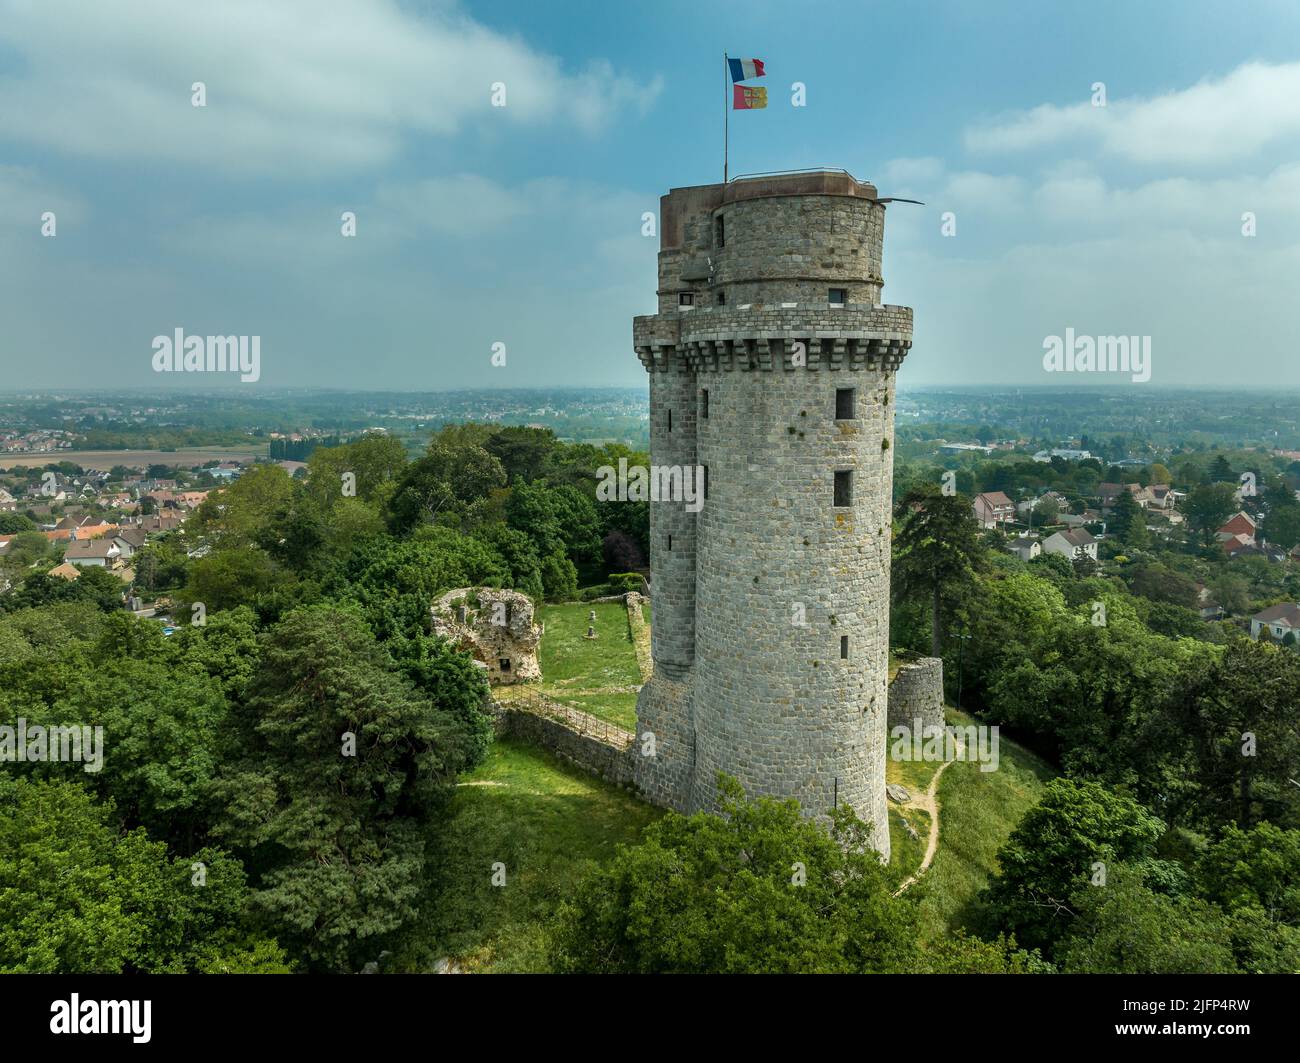 Aerial view of medieval ruined Montlhéry castle controlling the Paris - Orleans road with prominent keep towering over the hill in Central France Stock Photo